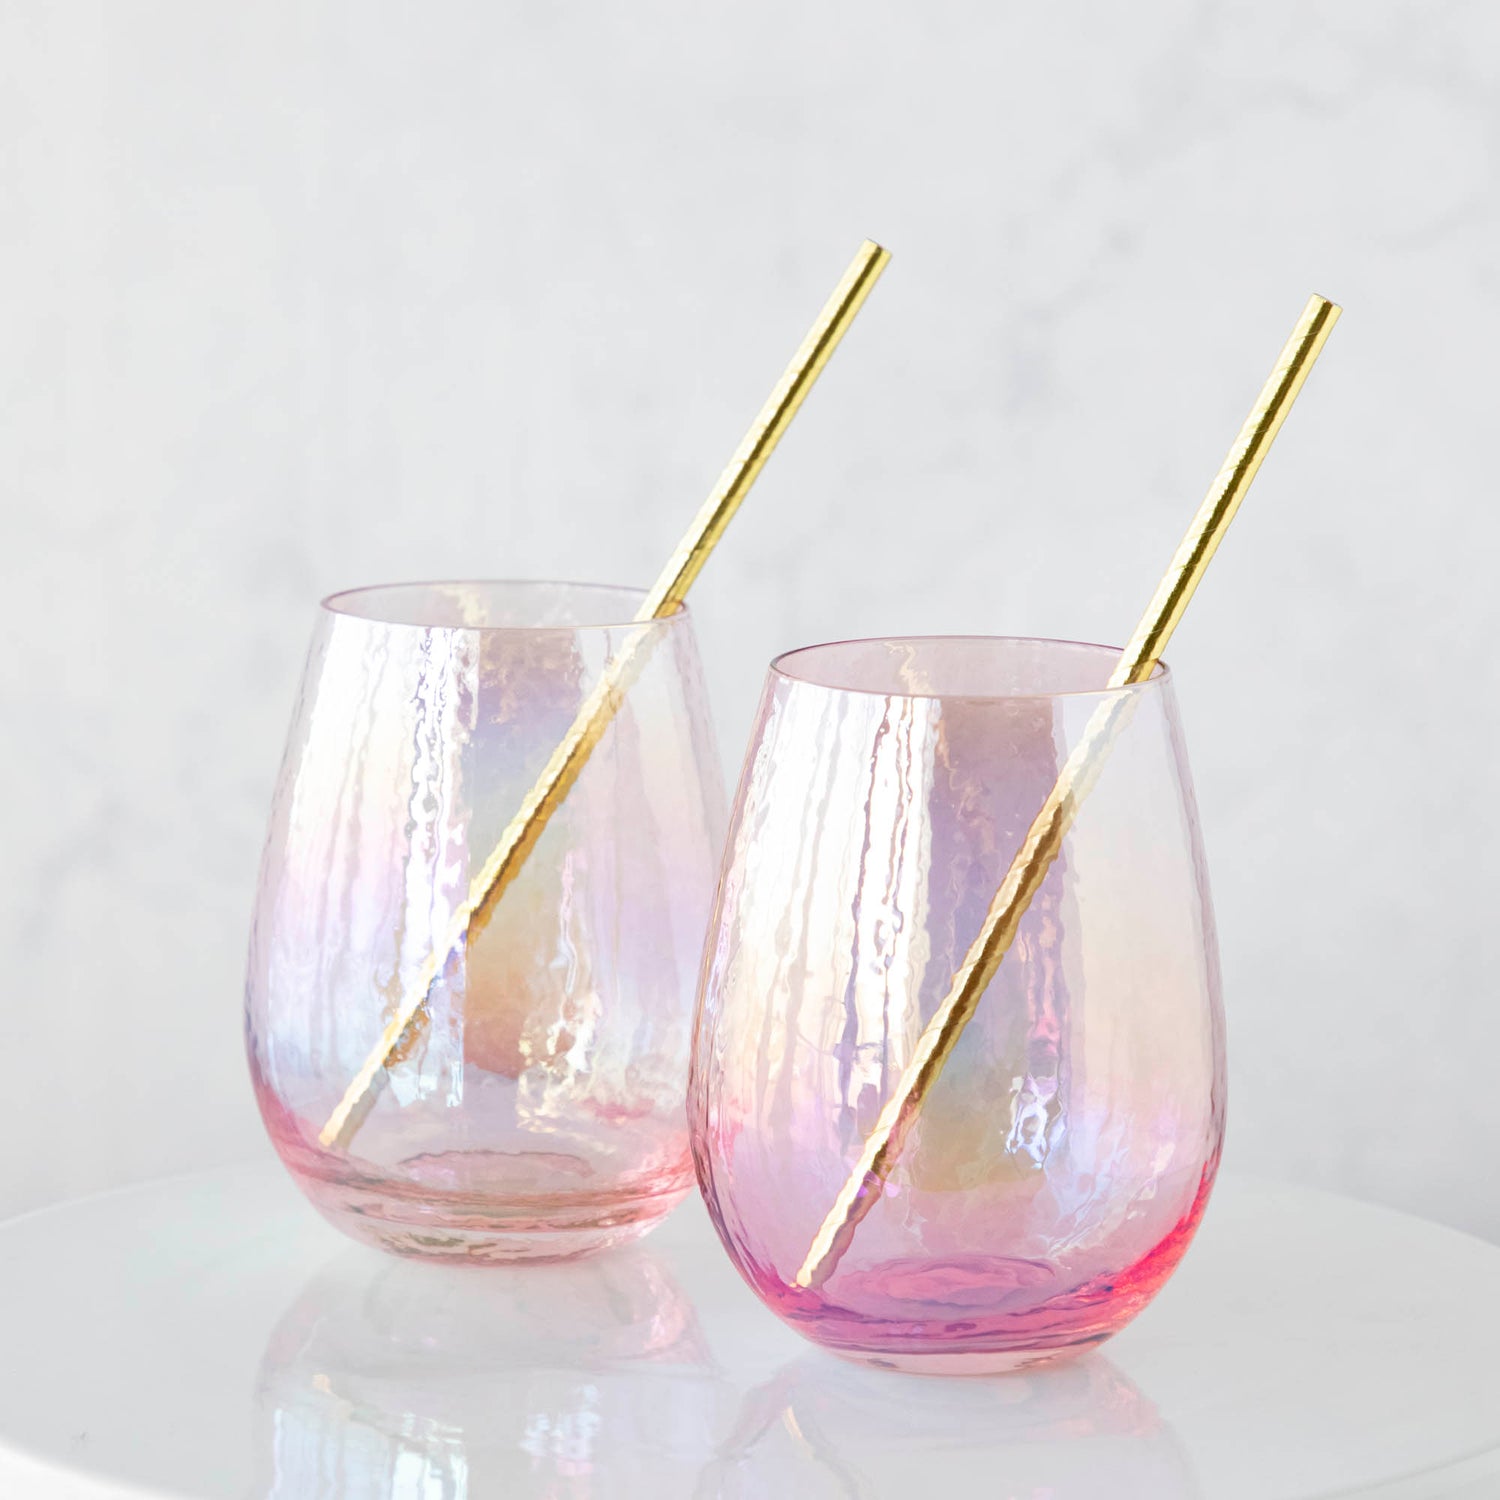 Two Luster Stemless Glassware with gold straws on a white table. (Zodax)